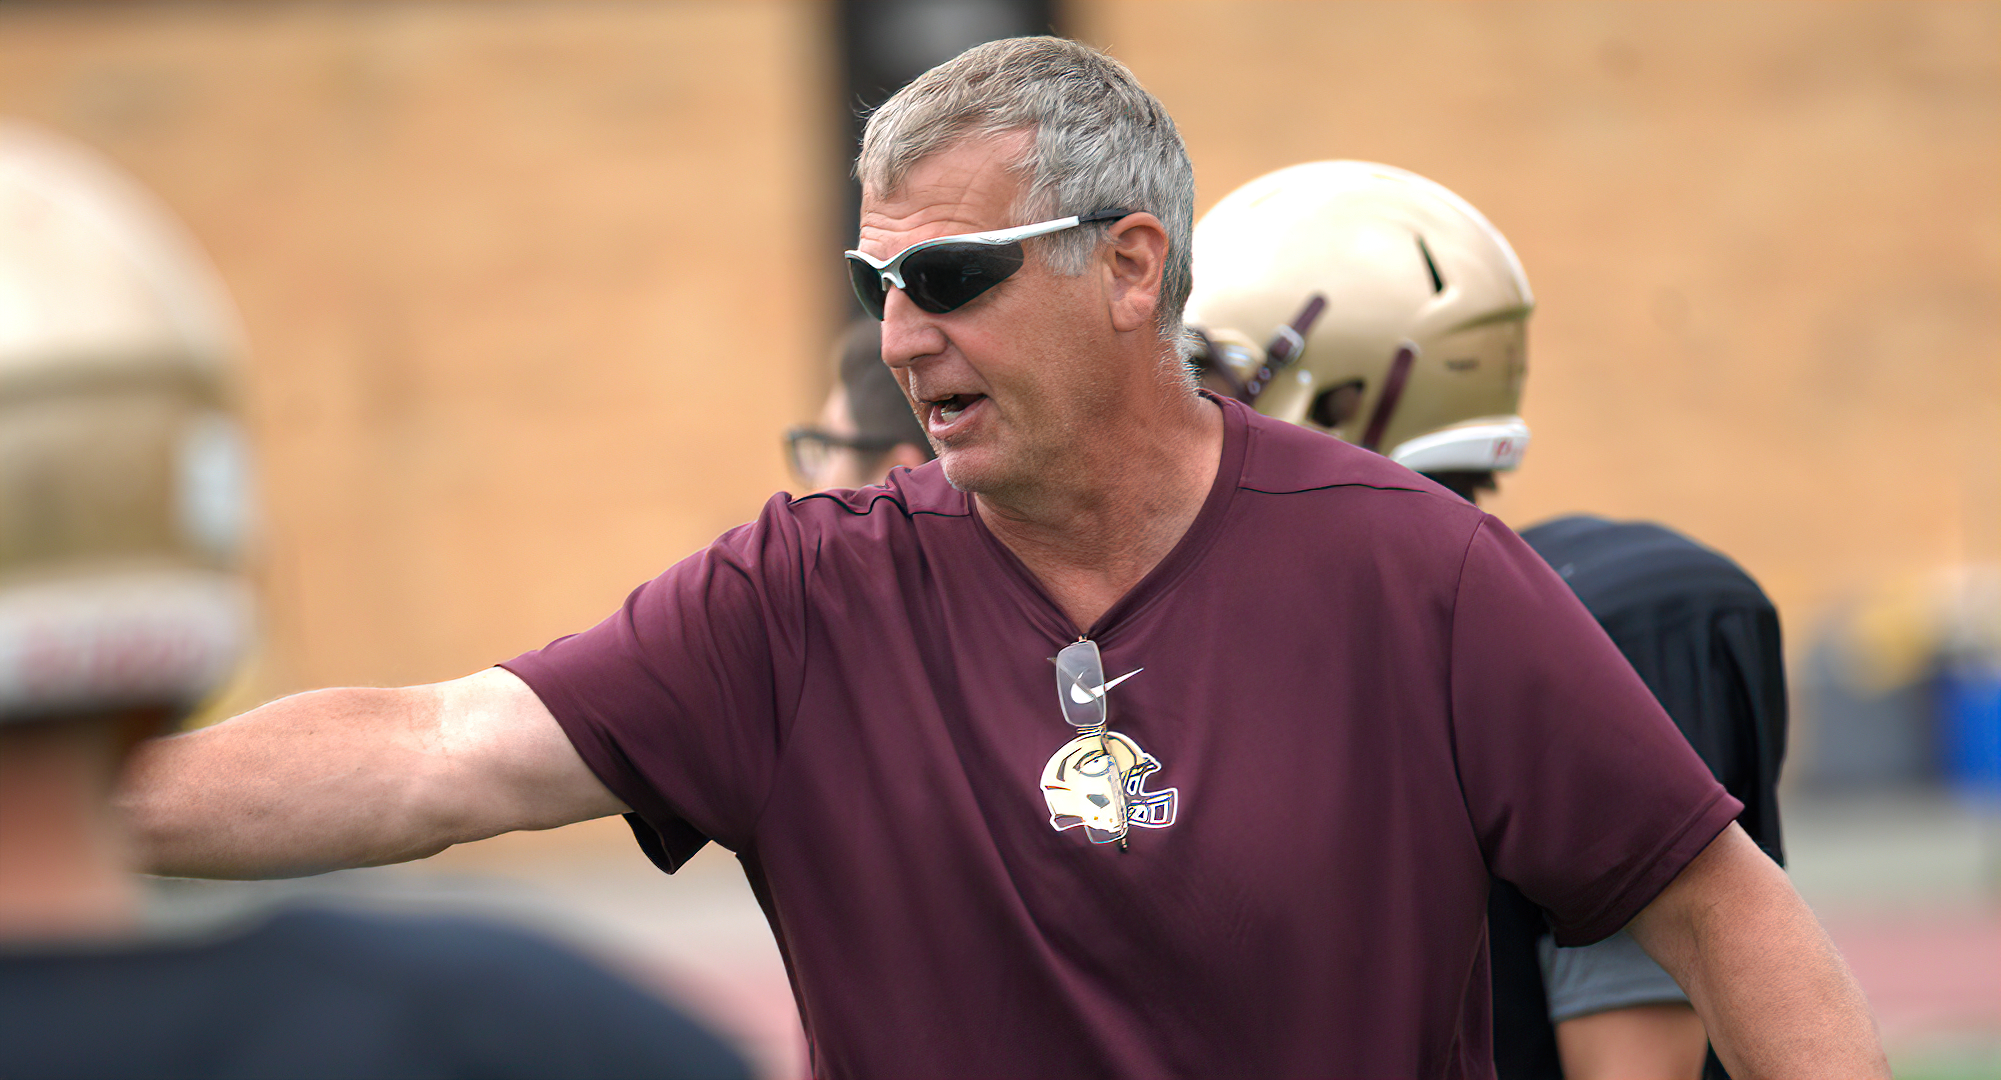 Dave Klug announced his retirement after 33 years with the Cobber football program. He was also a Hall of Fame player for Concordia who was drafted by the Kansas City Chiefs in 1980.